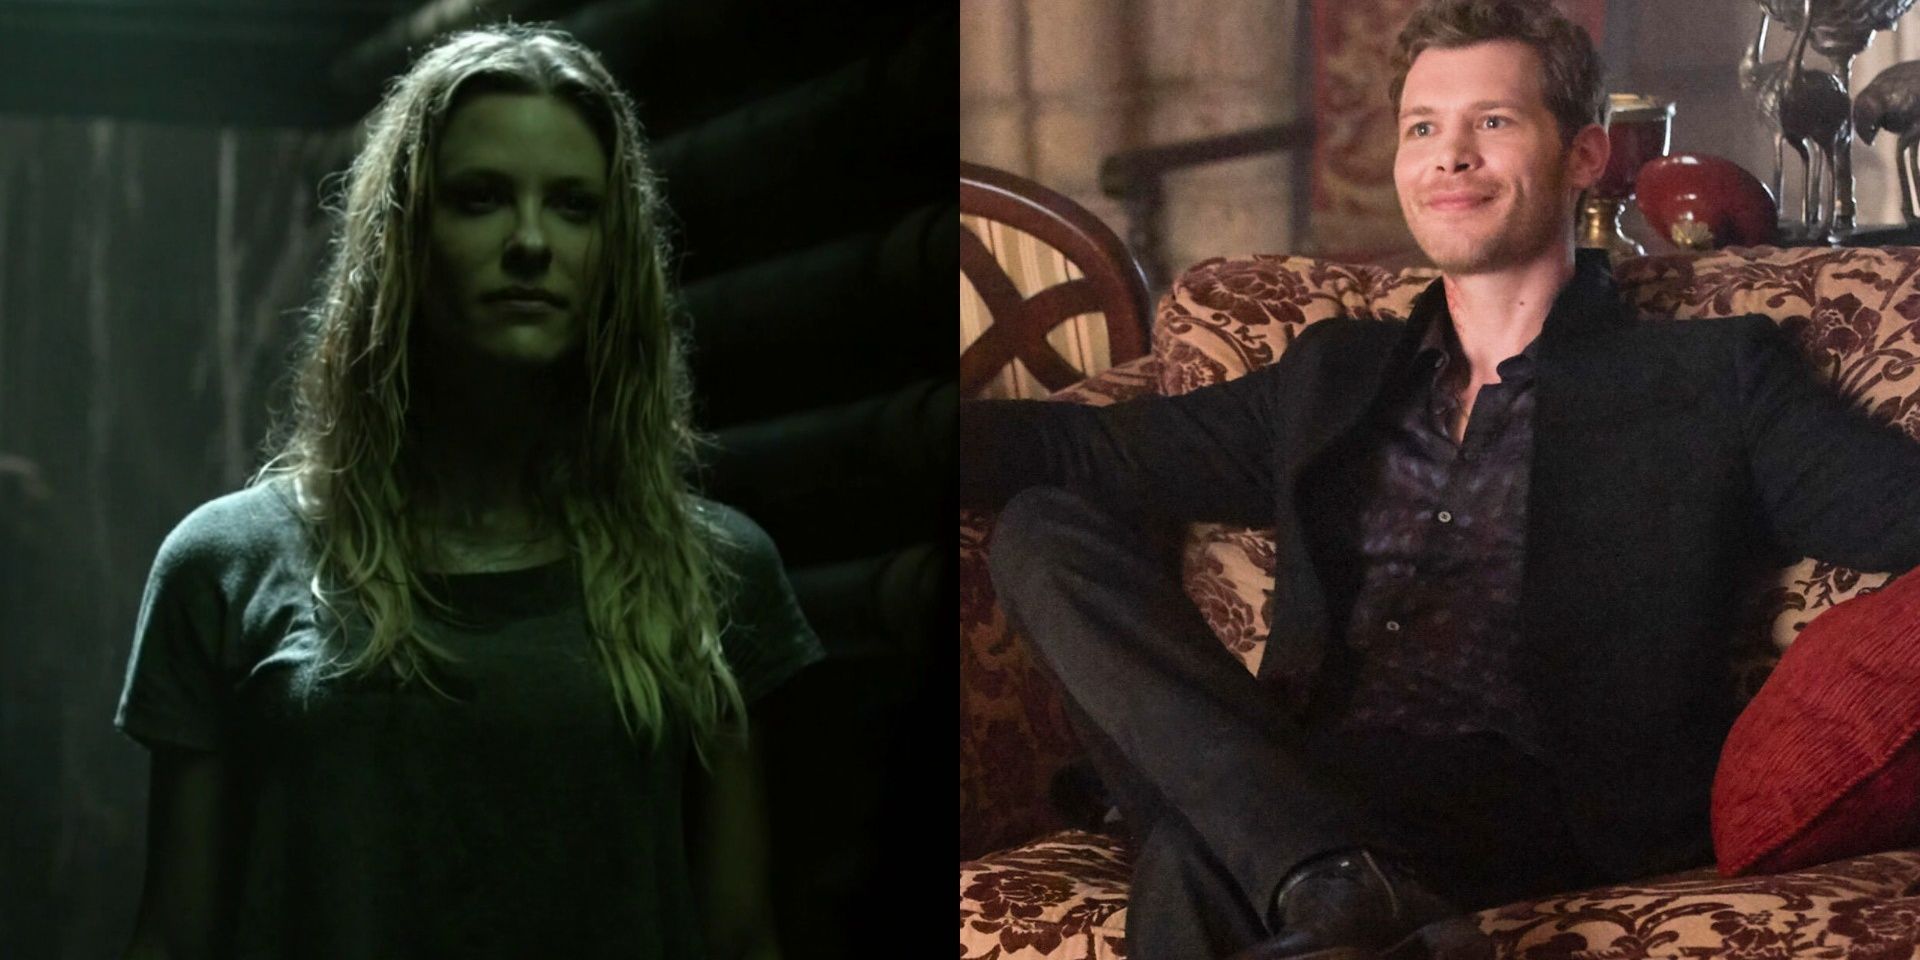 Kate and Klaus split photo from teen wolf and vampire diaries